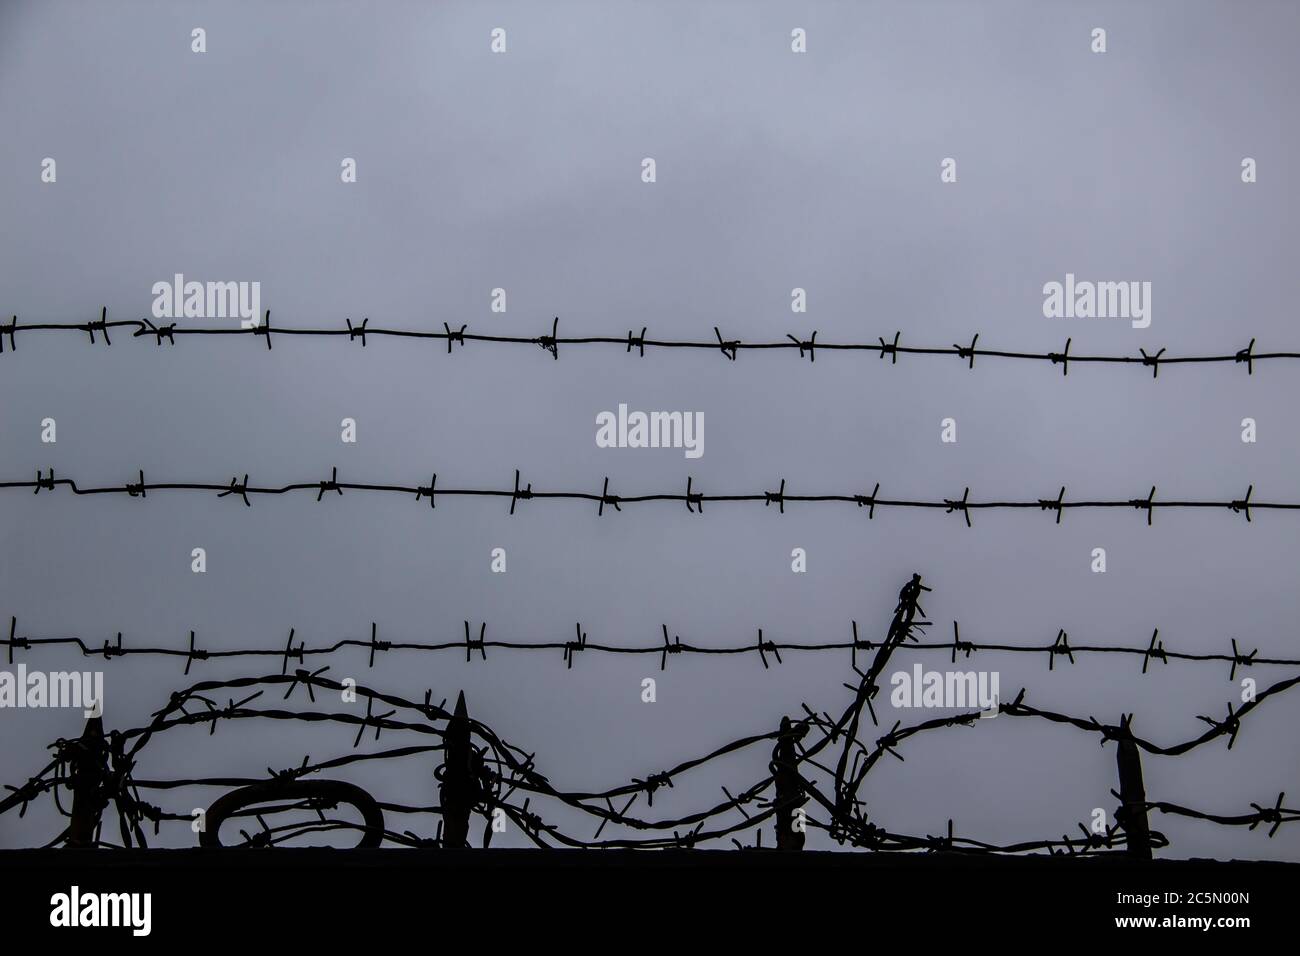 barbed wire fence on against grey sky background. Stock Photo